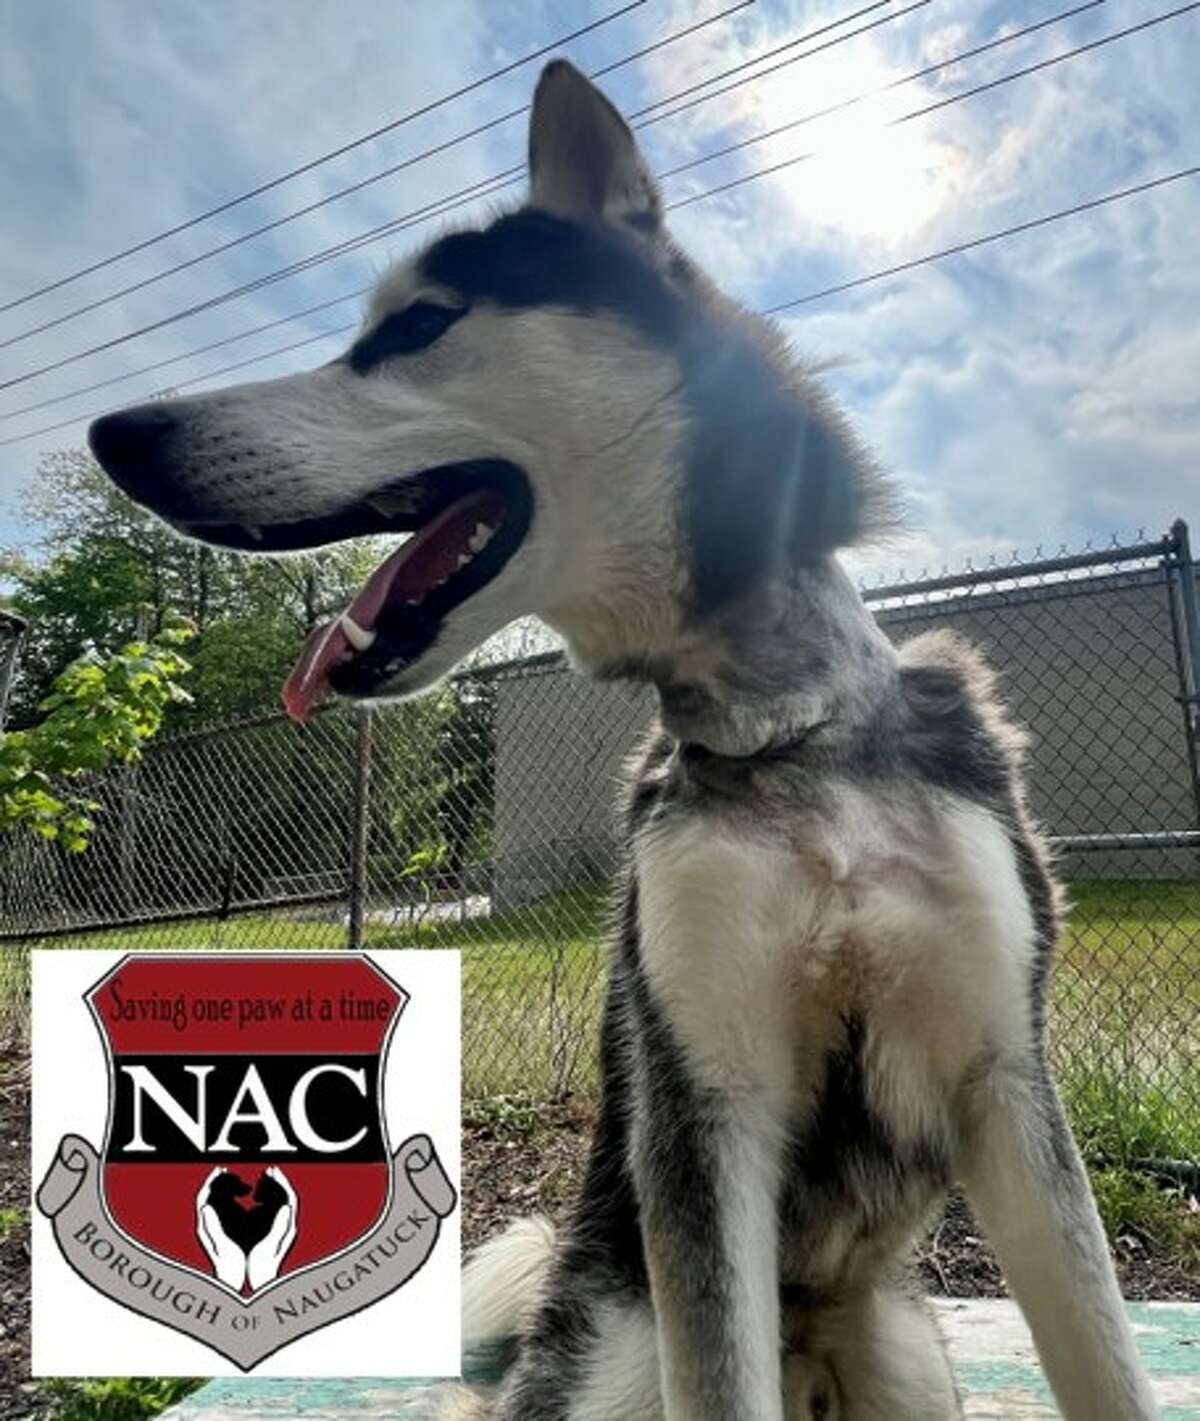 Naugatuck police say they have launched an animal cruelty investigation after a male Siberian husky suffering from multiple health problems was found roaming near the Waterbury border on the afternoon of May 13. The husky, named Justice, underwent surgery to remove a length of chain embedded in his neck, Sgt. Danielle Durette said at a news conference Monday.